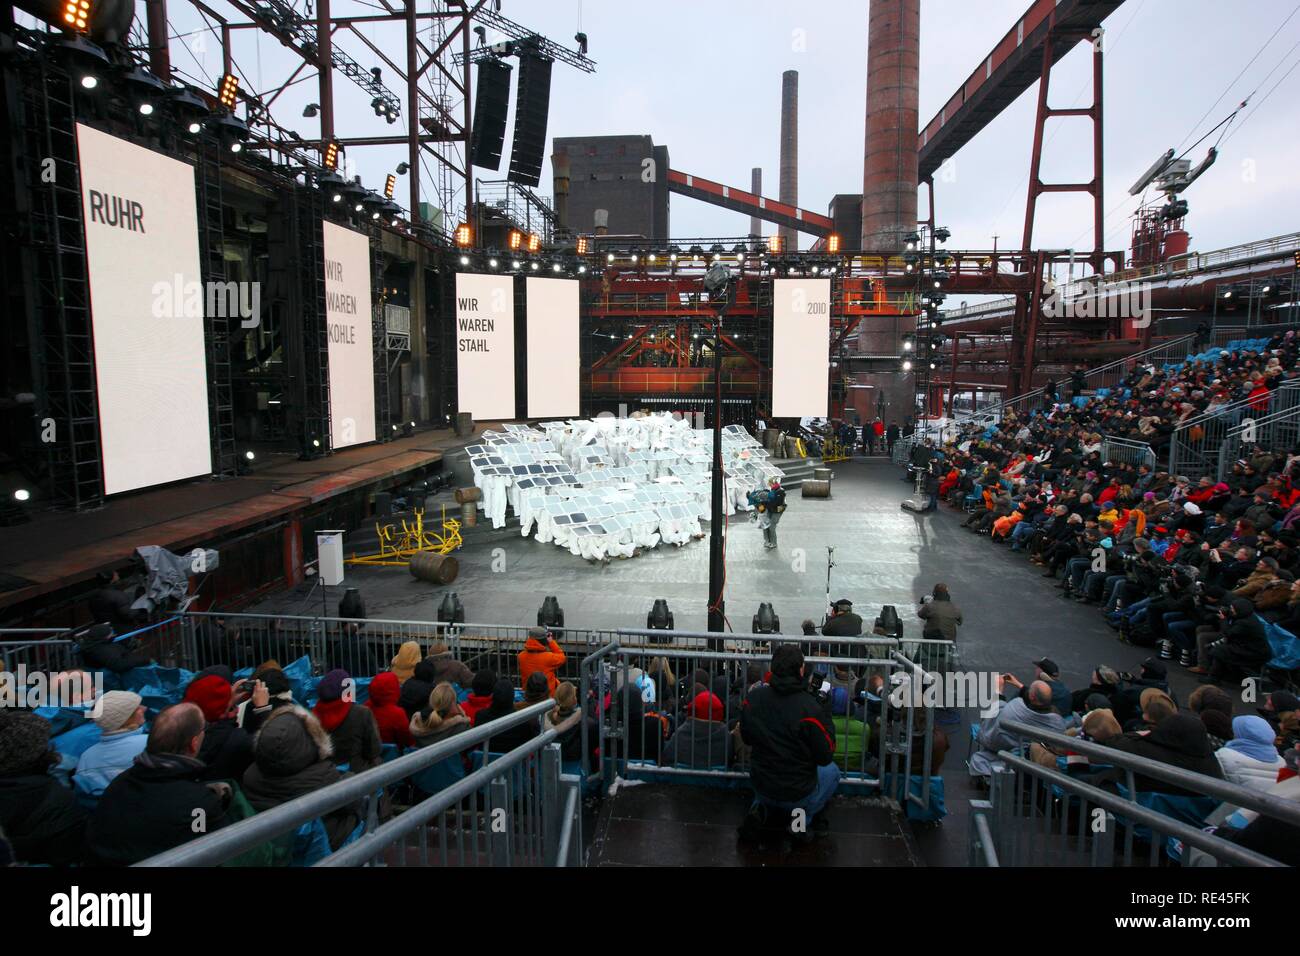 Dress rehearsal of the kick-off event for the Capital of Culture year 2010, Kokerei Zollverein coking plant, a part of the Zeche Stock Photo